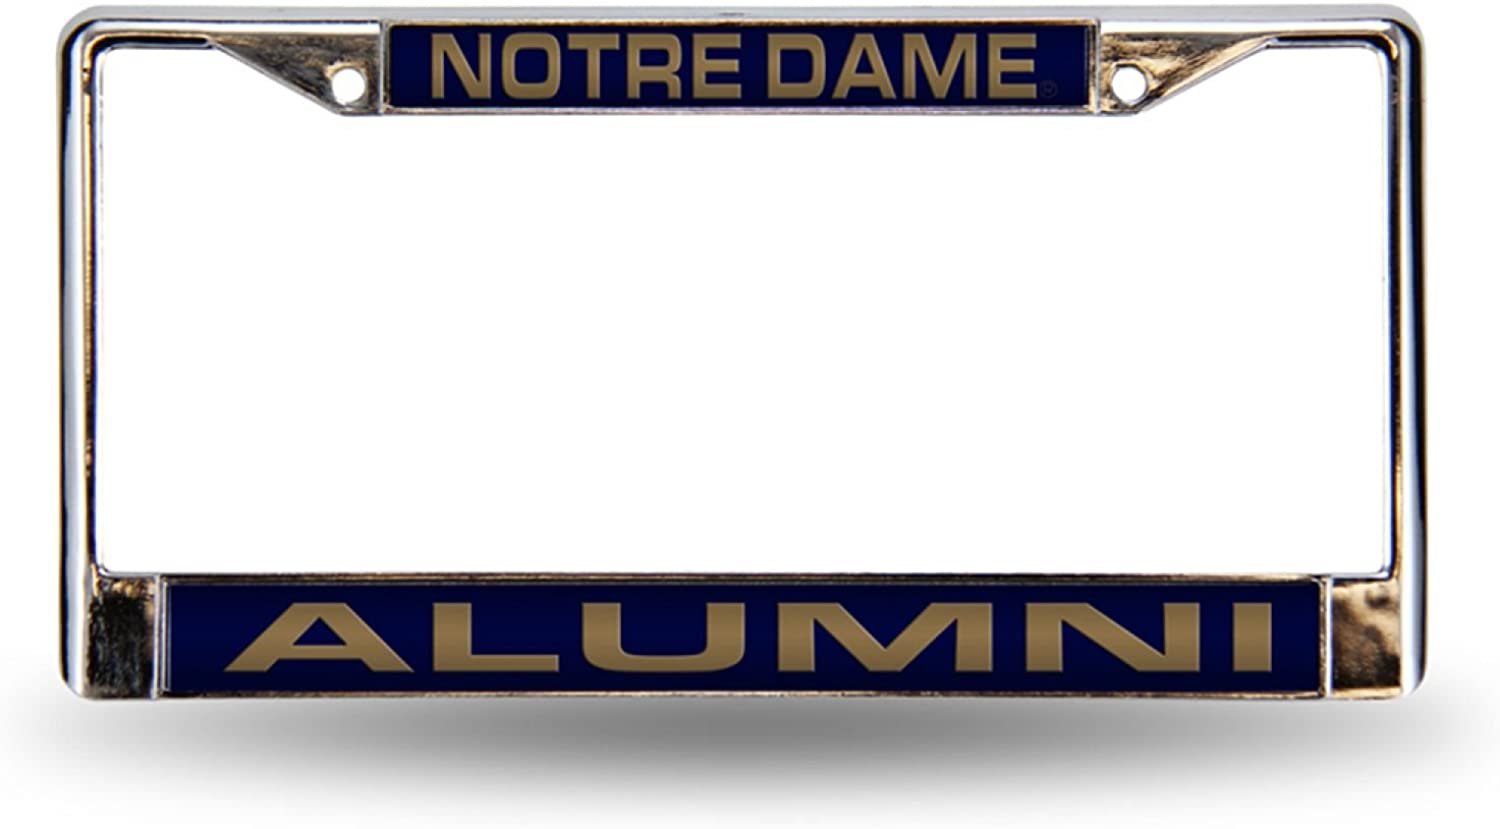 University of Notre Dame Fighting Irish Alumni Chrome Metal License Plate Frame Tag Cover, Laser Acrylic Mirrored Inserts, 12x6 Inch